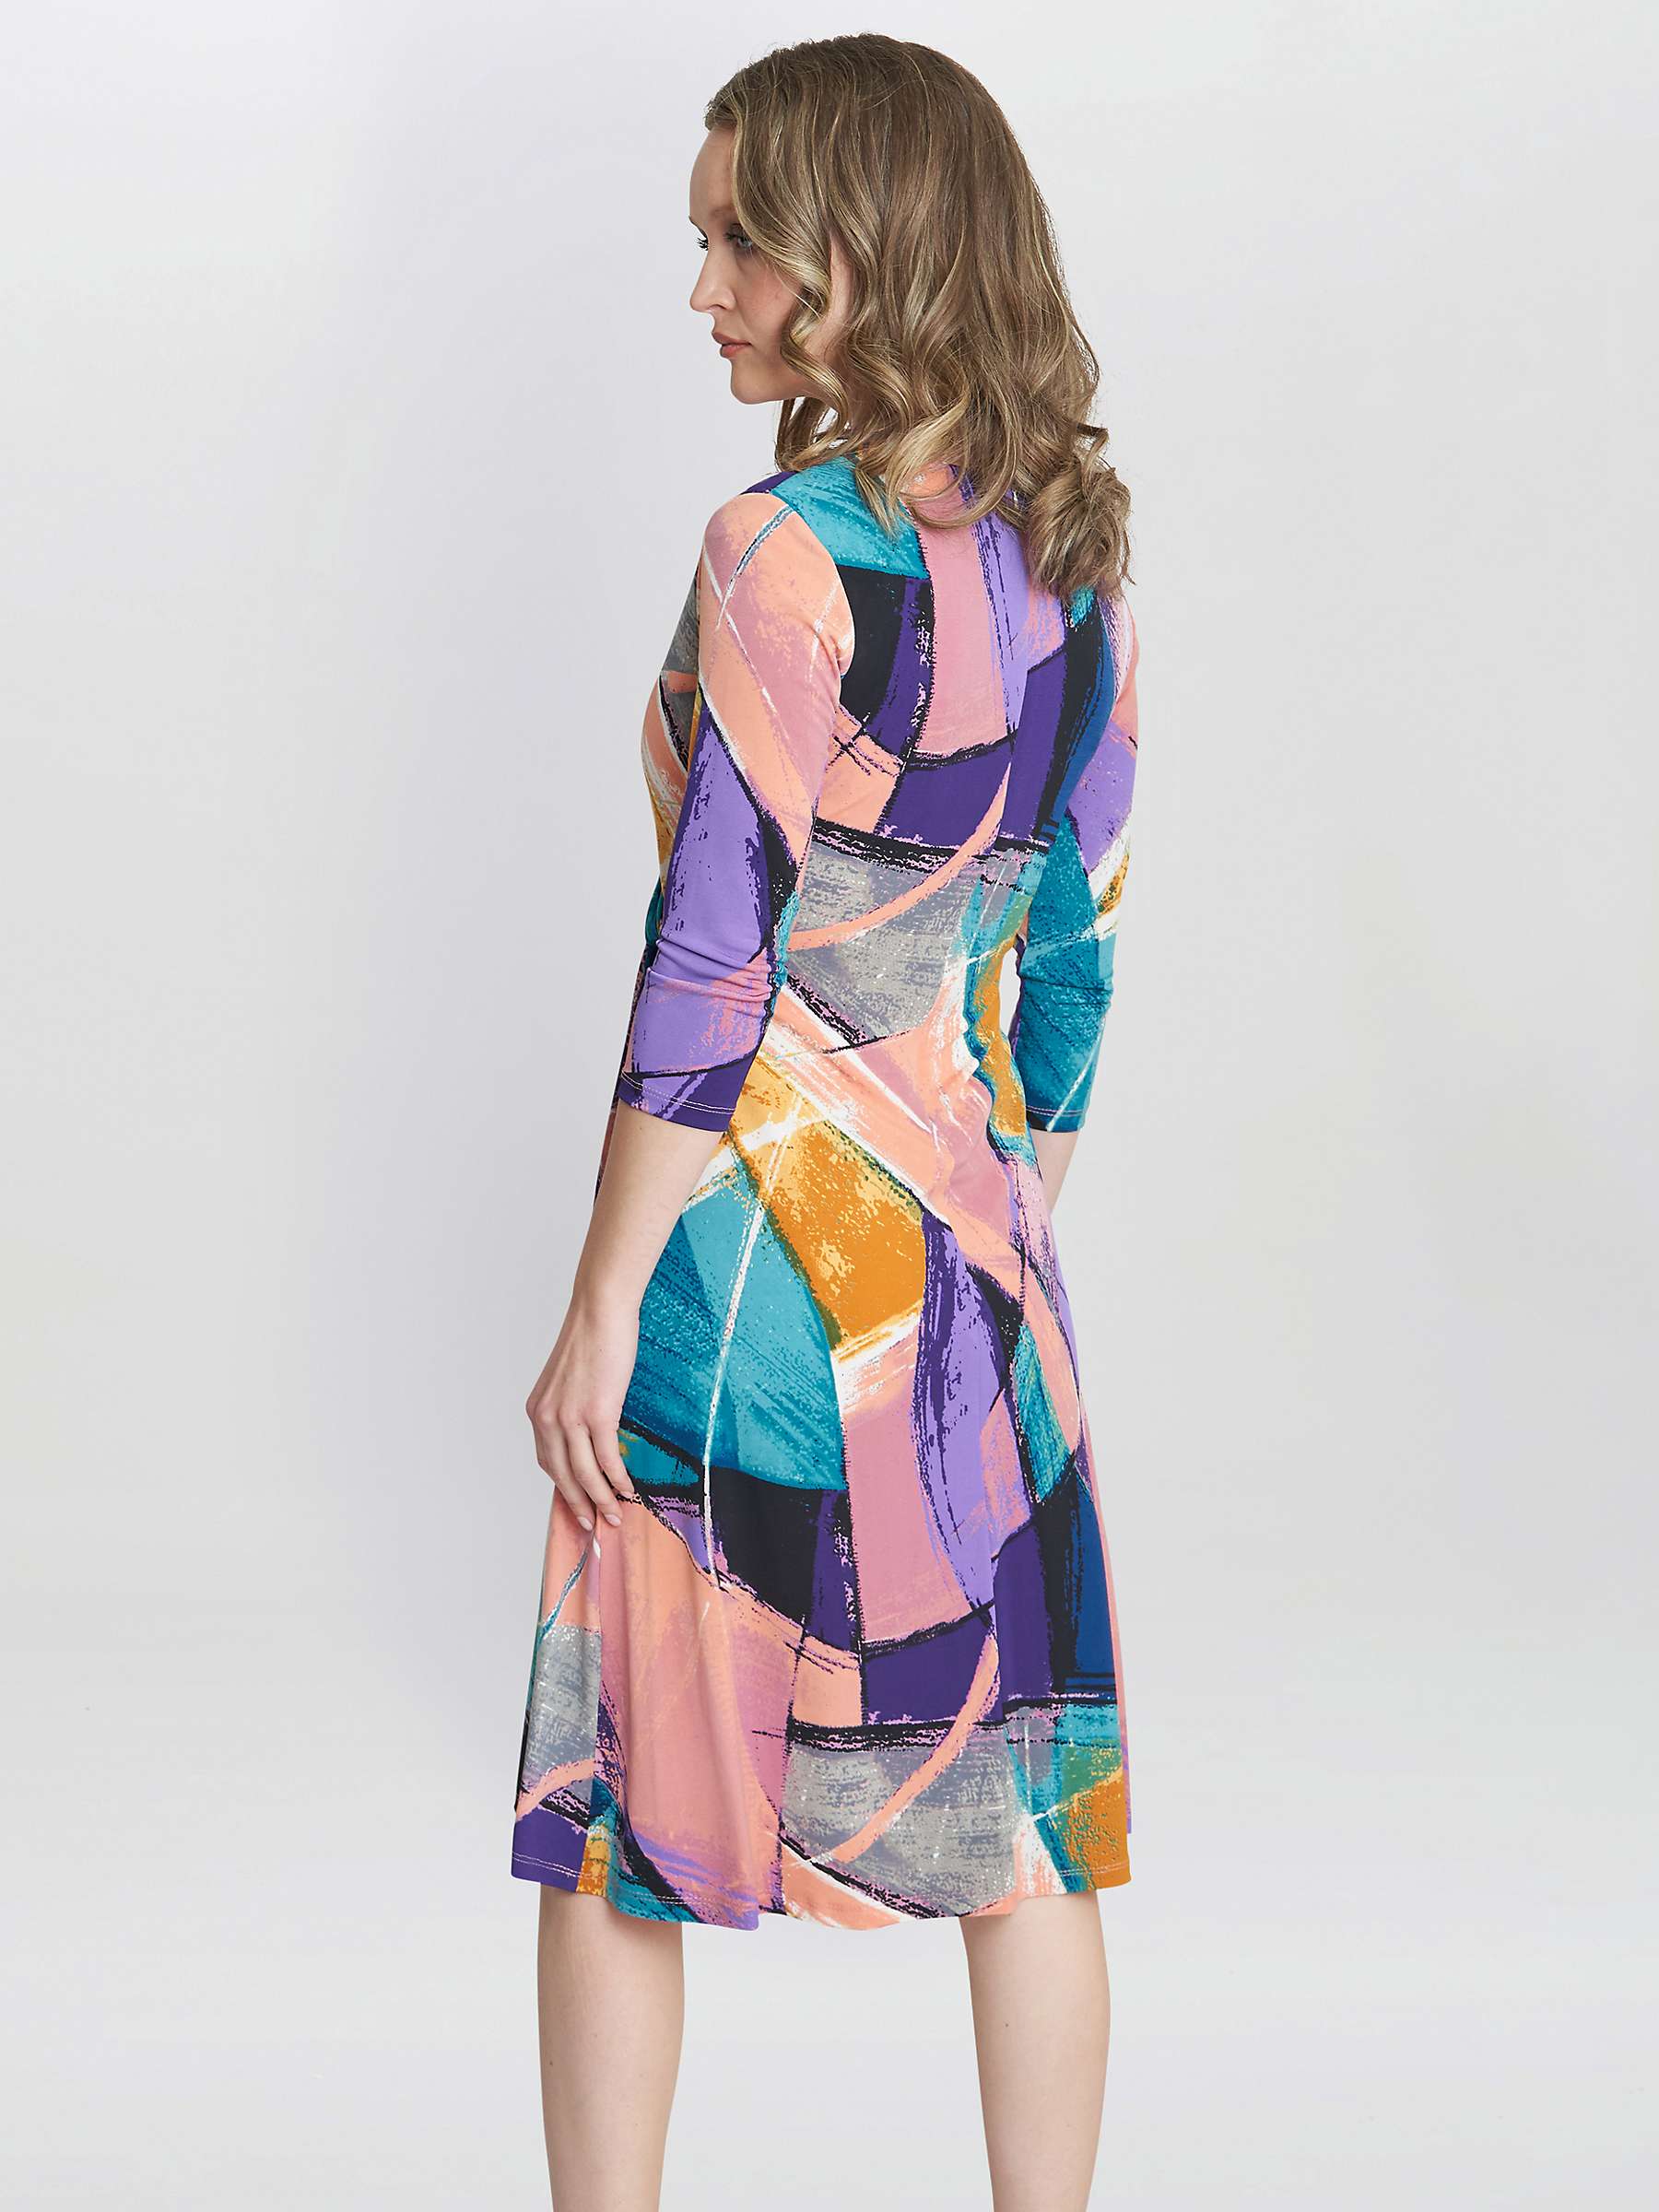 Buy Gina Bacconi Becky Jersey Wrap Dress, Peach/Multi Online at johnlewis.com